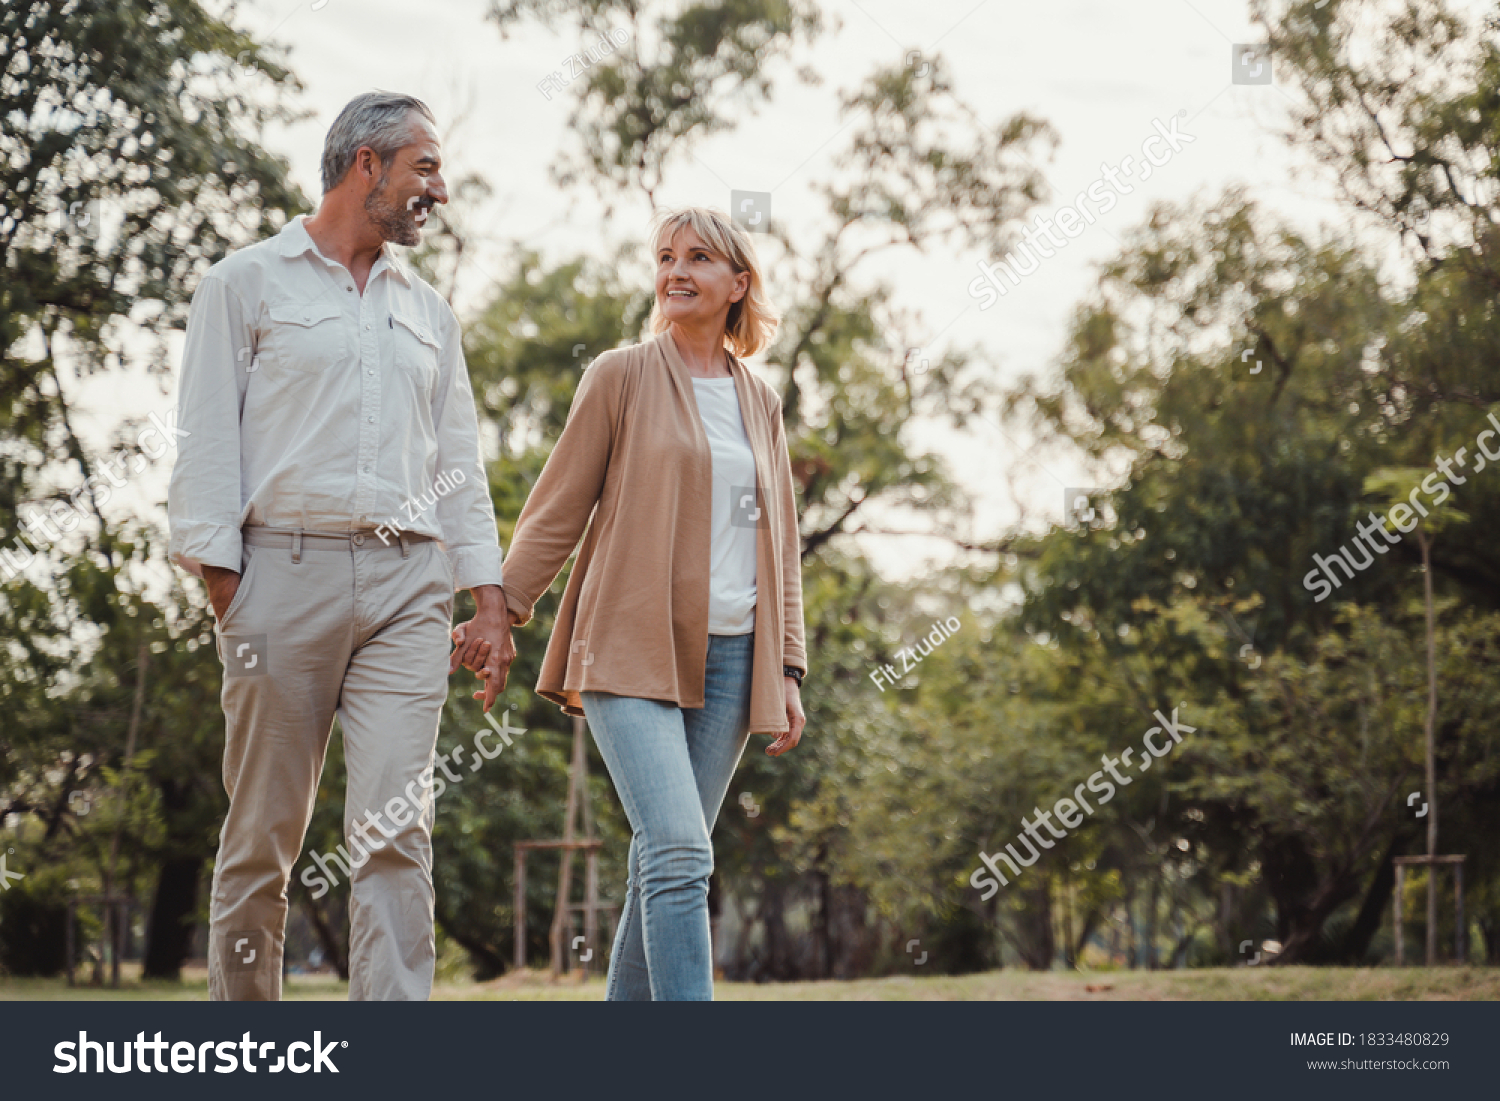 Romantic and elderly healthy lifestyle concept.Senior active caucasian couple holding hands looks happy in the park in the afternoon autumn sunlight,happy anniversary,happily retired with copy space. #1833480829